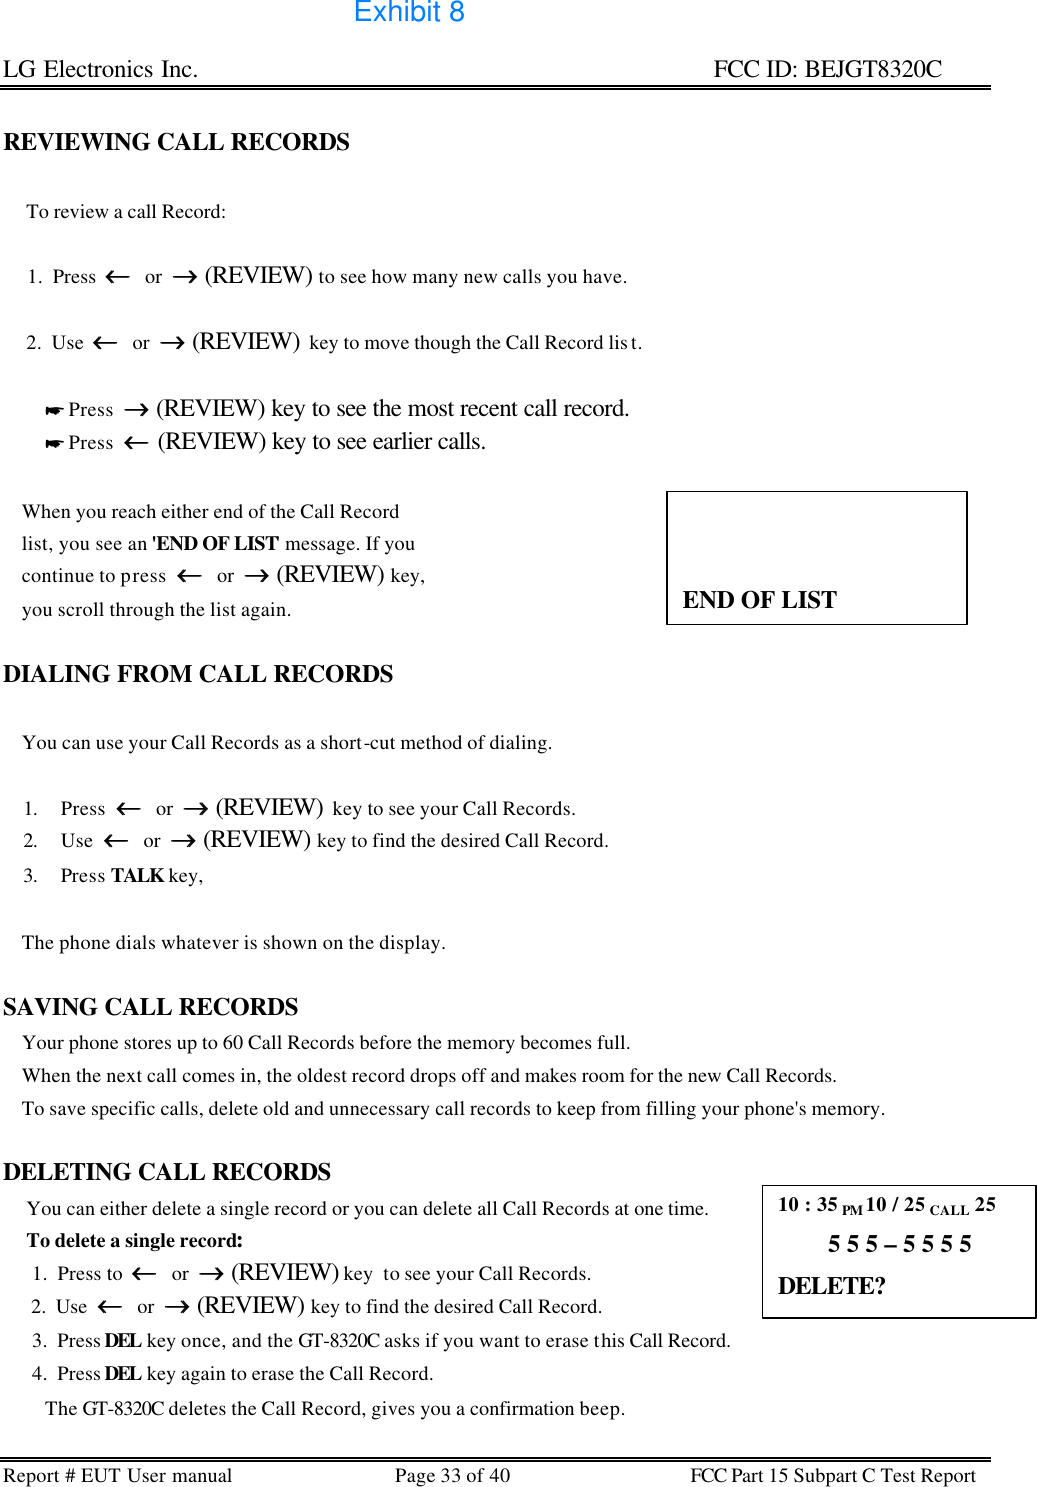 LG Electronics Inc.                                                                                                   FCC ID: BEJGT8320C Report # EUT User manual Page 33 of 40 FCC Part 15 Subpart C Test Report   REVIEWING CALL RECORDS       To review a call Record:       1.  Press  ←←  or  →→ (REVIEW) to see how many new calls you have.       2.  Use  ←←  or  →→ (REVIEW)  key to move though the Call Record lis t.                    * Press  →→ (REVIEW) key to see the most recent call record.          * Press  ←← (REVIEW) key to see earlier calls.      When you reach either end of the Call Record     list, you see an &apos;END OF LIST&apos; message. If you     continue to press  ←←  or  →→ (REVIEW) key,     you scroll through the list again.   DIALING FROM CALL RECORDS      You can use your Call Records as a short-cut method of dialing.  1. Press  ←←  or  →→ (REVIEW)  key to see your Call Records. 2. Use  ←←  or  →→ (REVIEW) key to find the desired Call Record. 3. Press TALK key,      The phone dials whatever is shown on the display.  SAVING CALL RECORDS     Your phone stores up to 60 Call Records before the memory becomes full.     When the next call comes in, the oldest record drops off and makes room for the new Call Records.      To save specific calls, delete old and unnecessary call records to keep from filling your phone&apos;s memory.   DELETING CALL RECORDS      You can either delete a single record or you can delete all Call Records at one time.      To delete a single record:       1.  Press to  ←←  or  →→ (REVIEW) key  to see your Call Records.       2.  Use  ←←  or  →→ (REVIEW) key to find the desired Call Record.       3.  Press DEL key once, and the GT-8320C asks if you want to erase this Call Record.        4.  Press DEL key again to erase the Call Record.          The GT-8320C deletes the Call Record, gives you a confirmation beep.                 END OF LIST 10 : 35 PM 10 / 25 CALL 25         5 5 5 – 5 5 5 5 DELETE? Exhibit 8